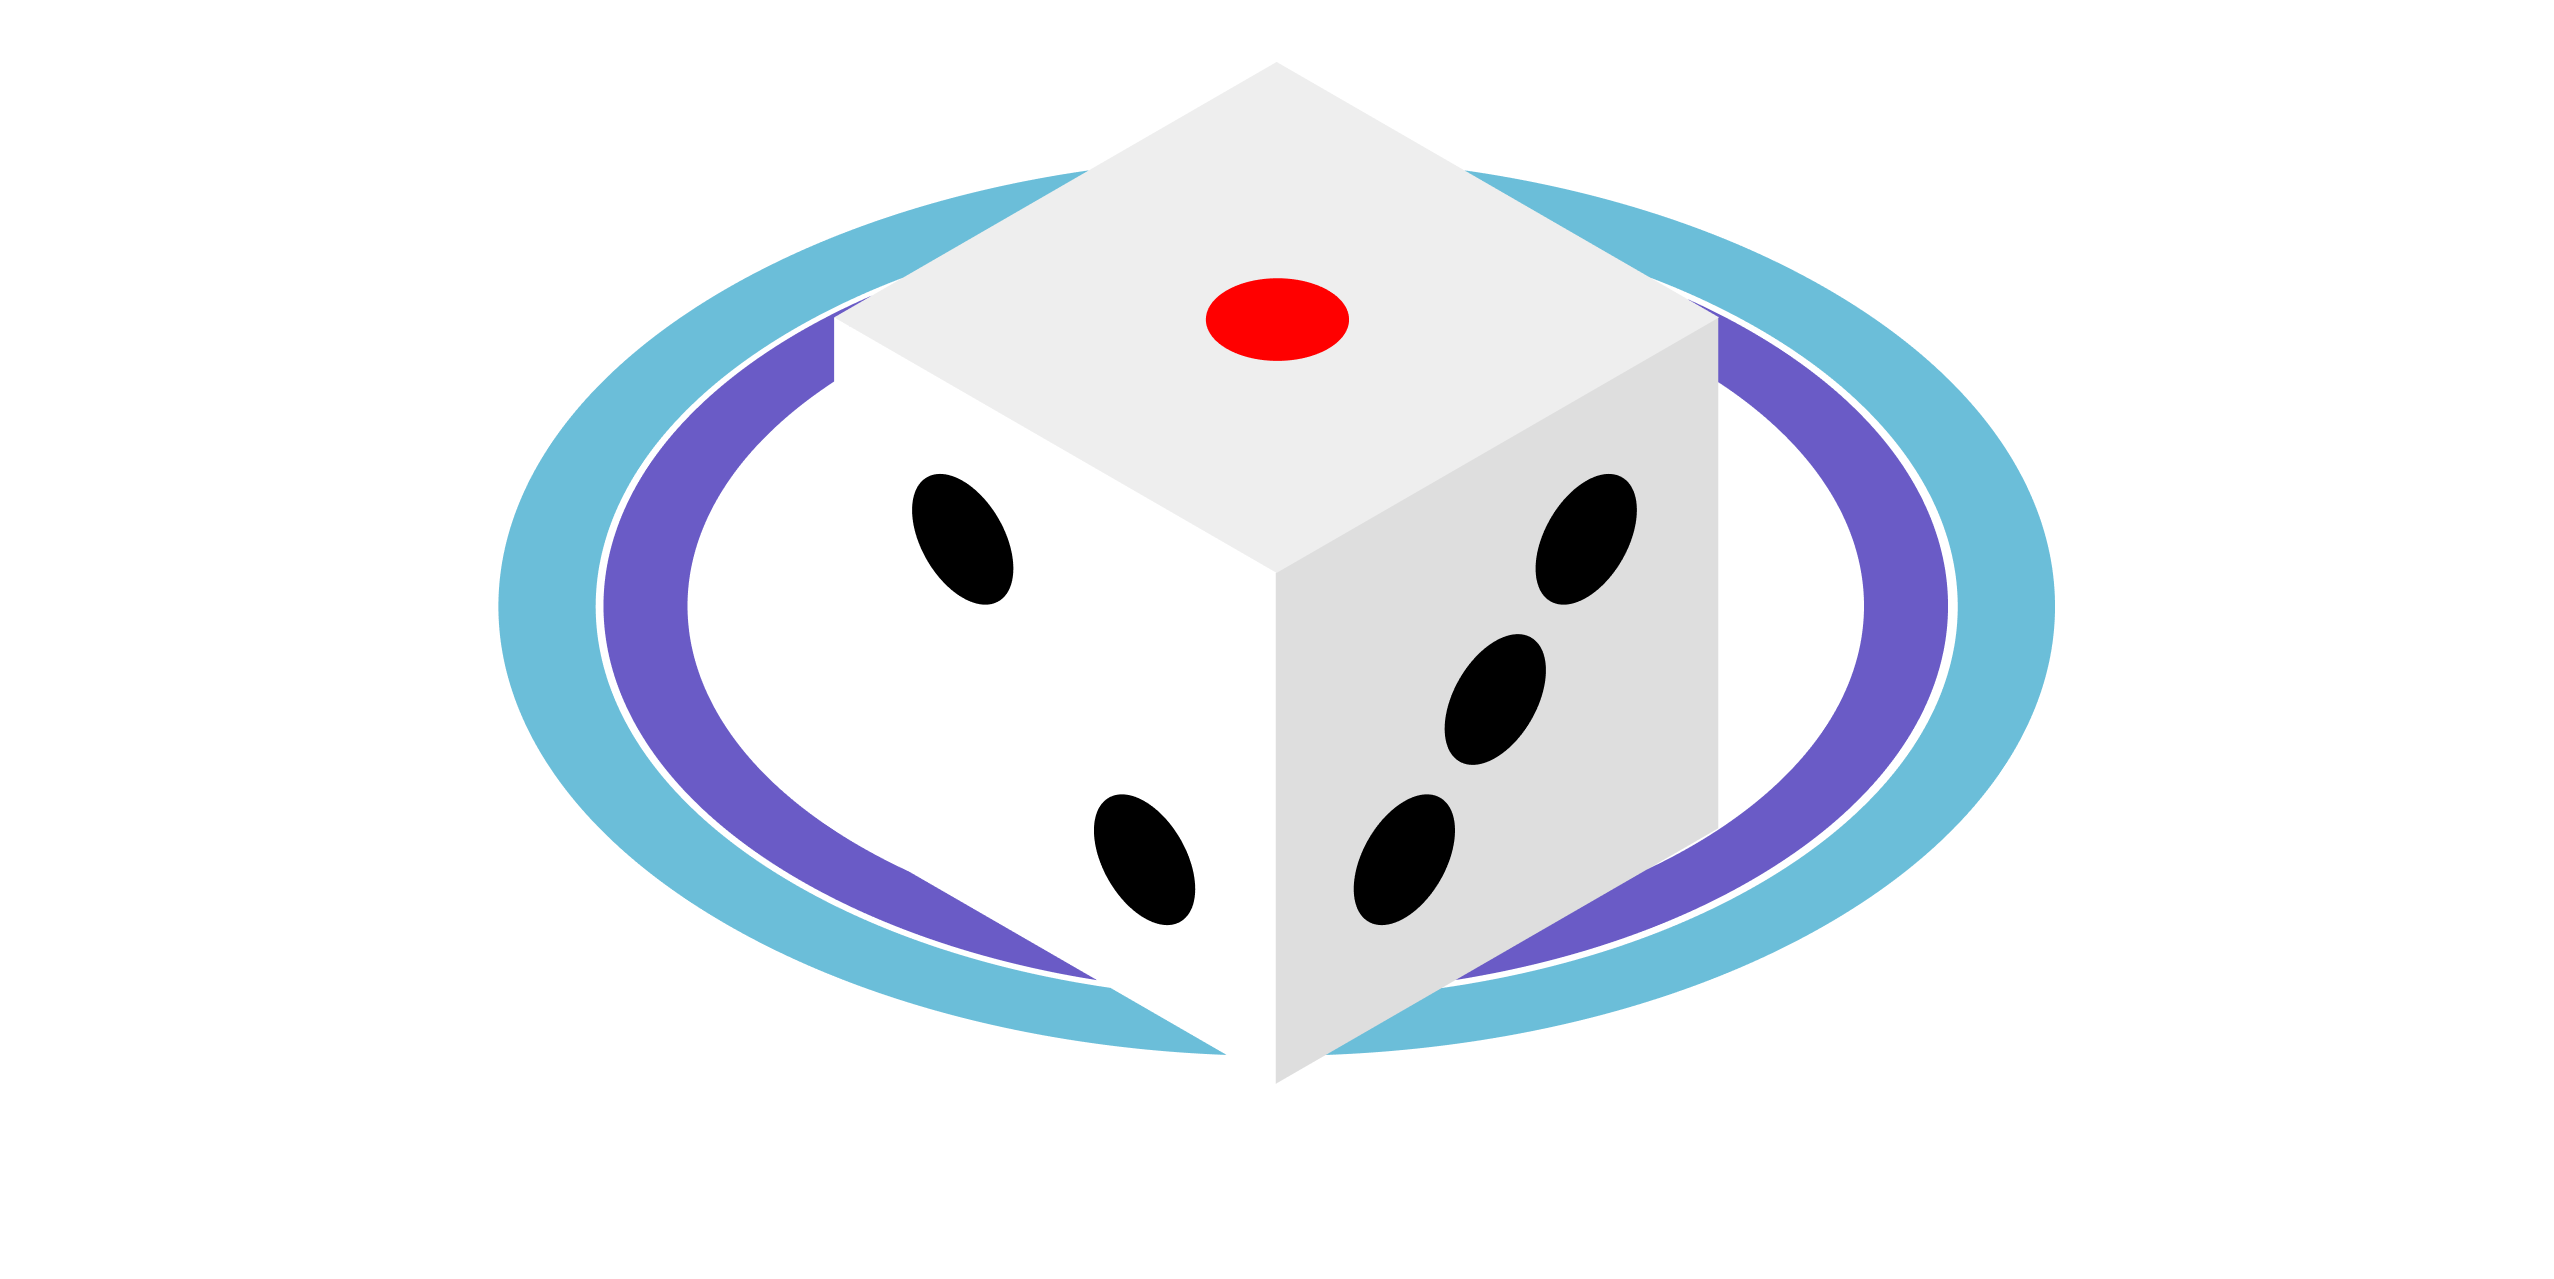 Dice and Geometry